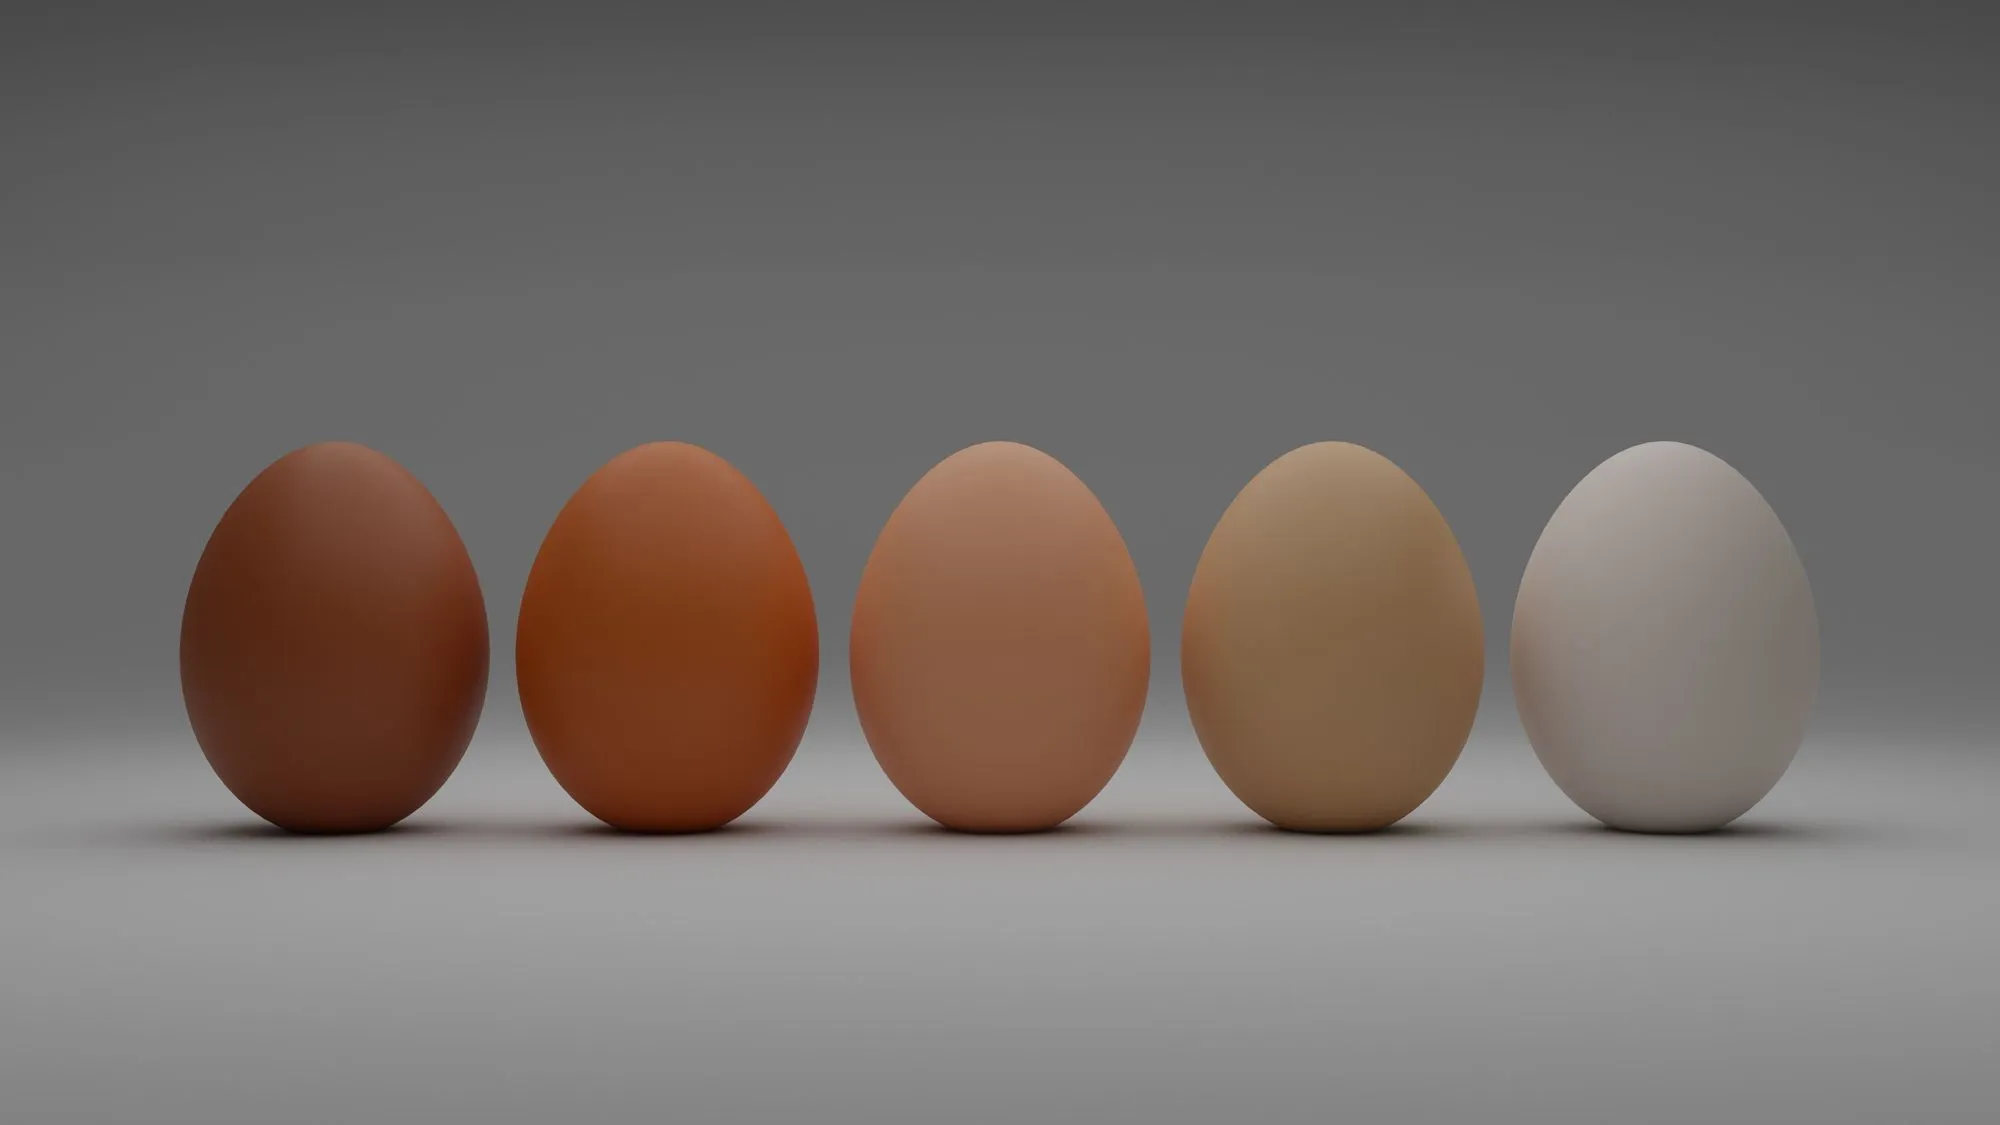 The color of the egg on the outside may not affect the taste or nutrition.